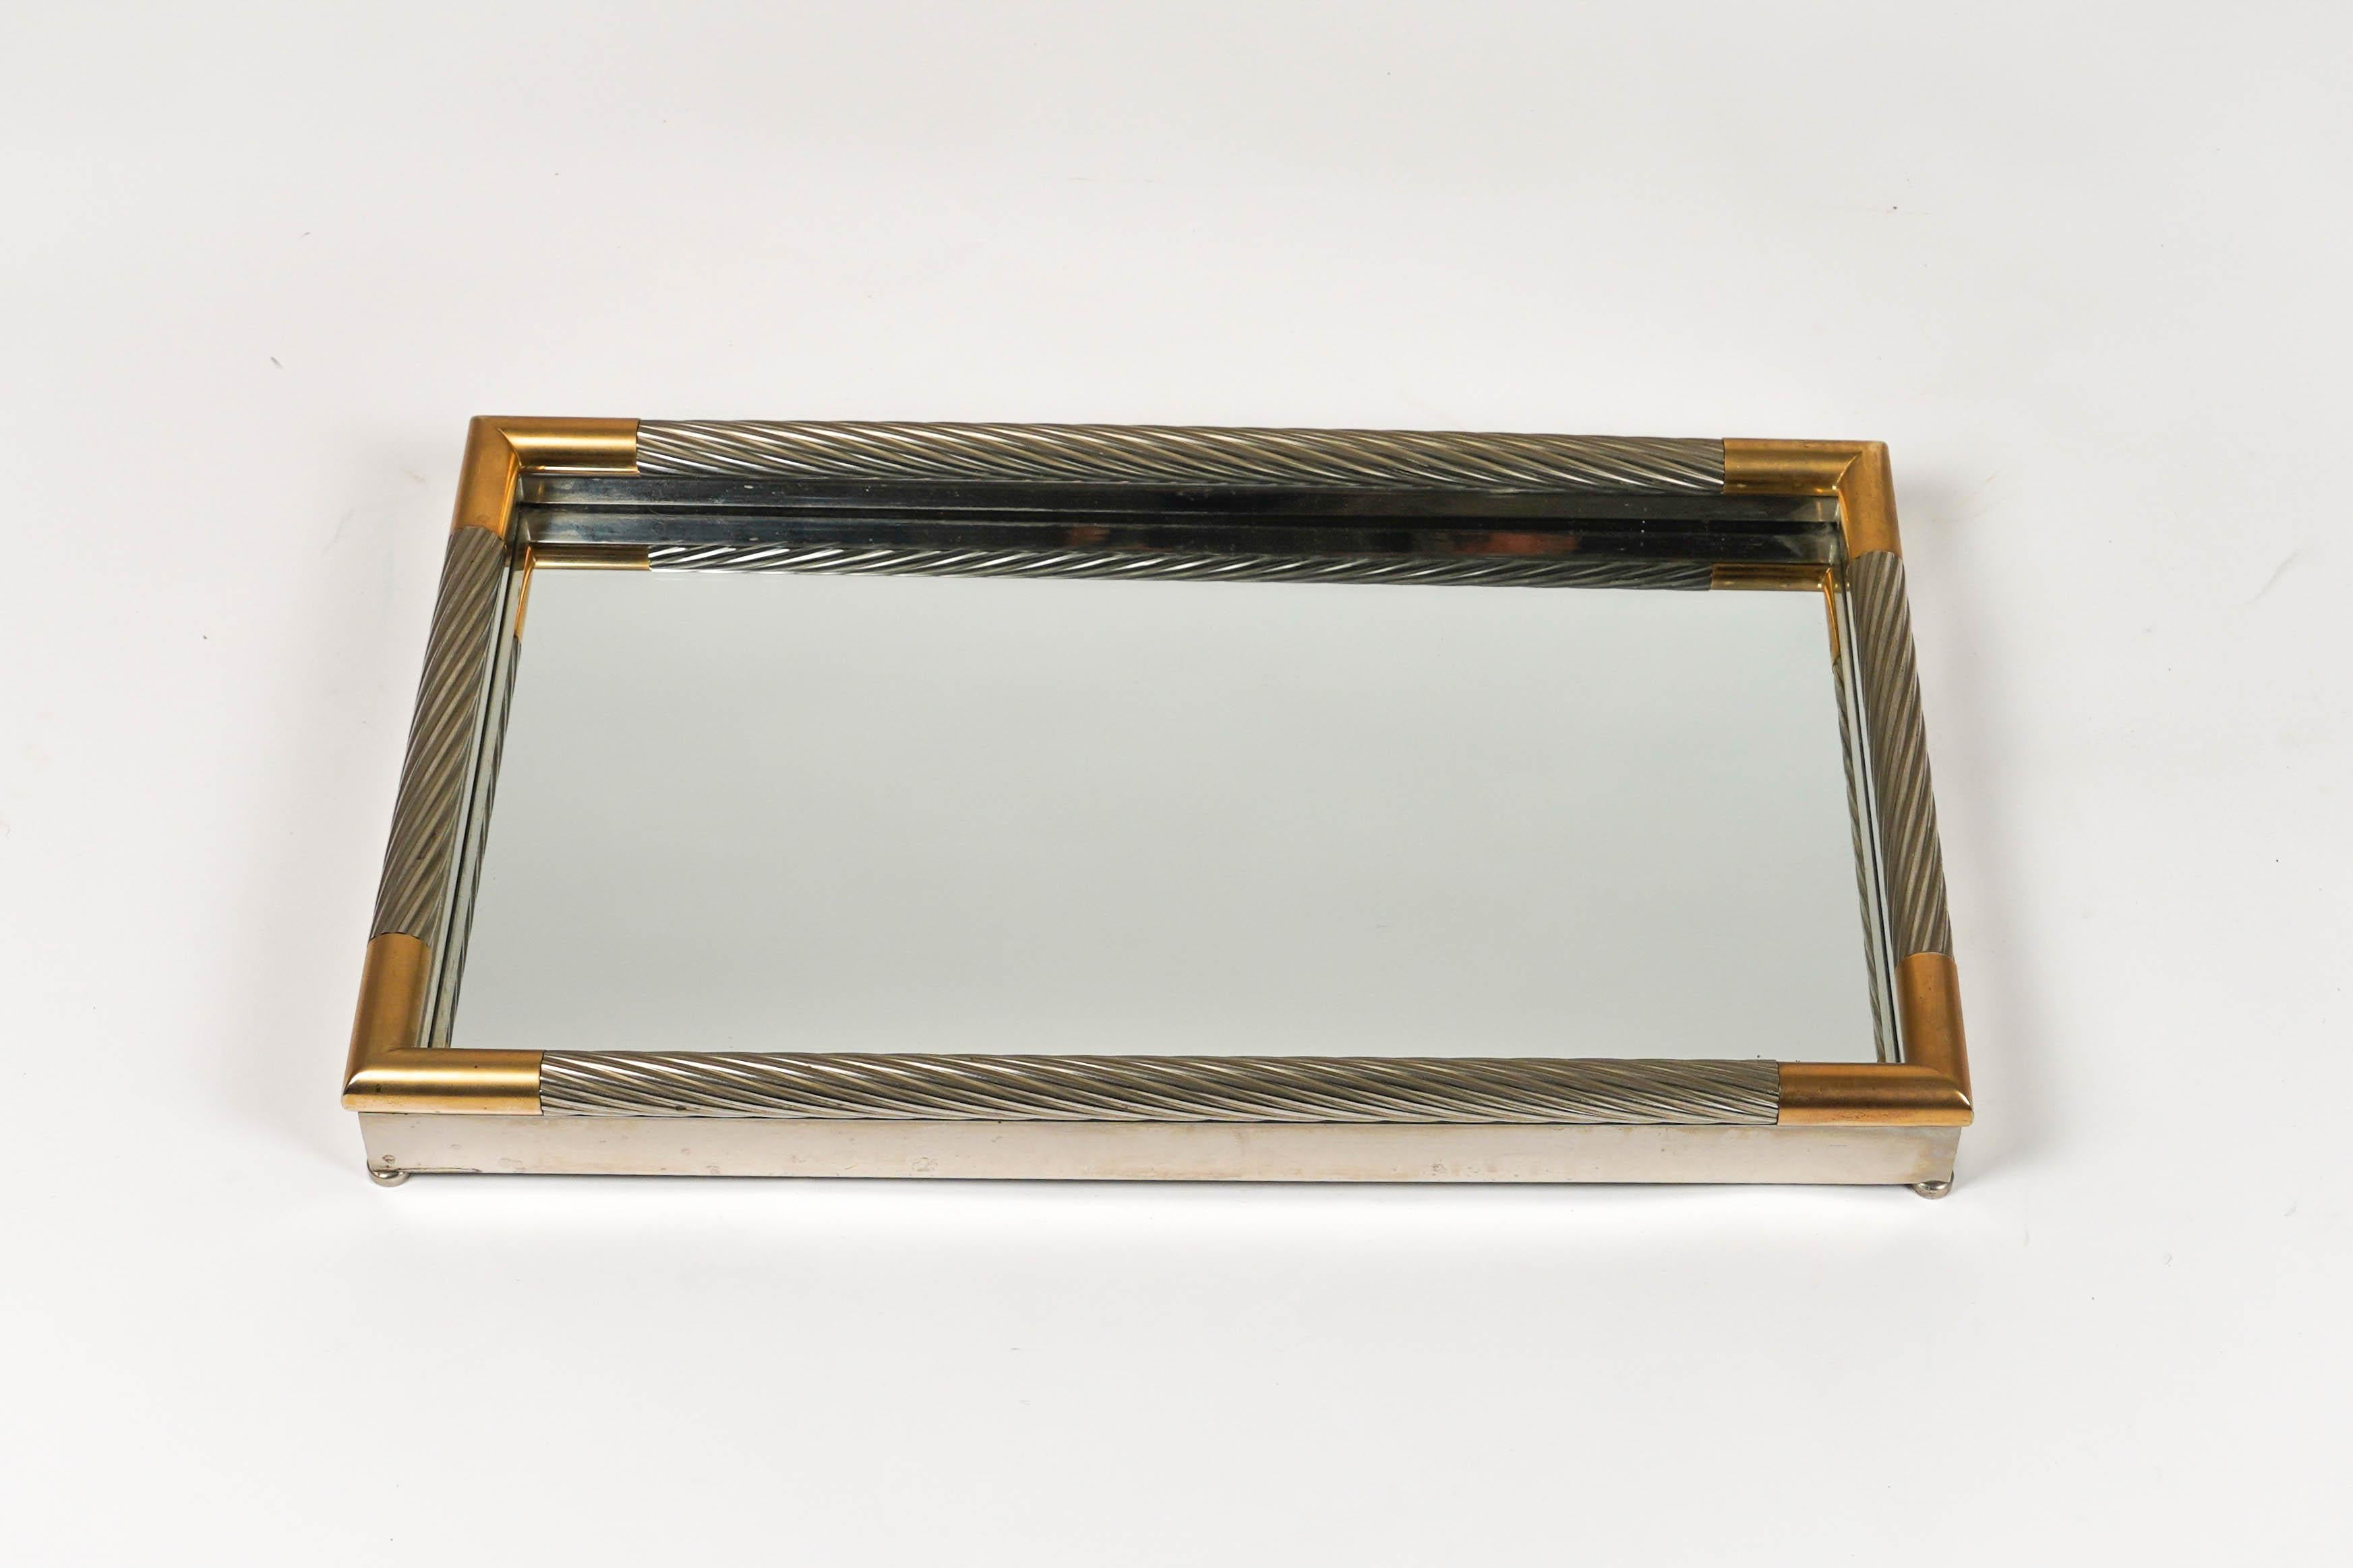 Mid-century  Rectangular vide-poche  or serving tray in silver metal, mirror e corners brass by the Italian designer Tommaso Barbi. 

Made in Italy in the 1970s.

The original label is still attached as shown in the pictures.